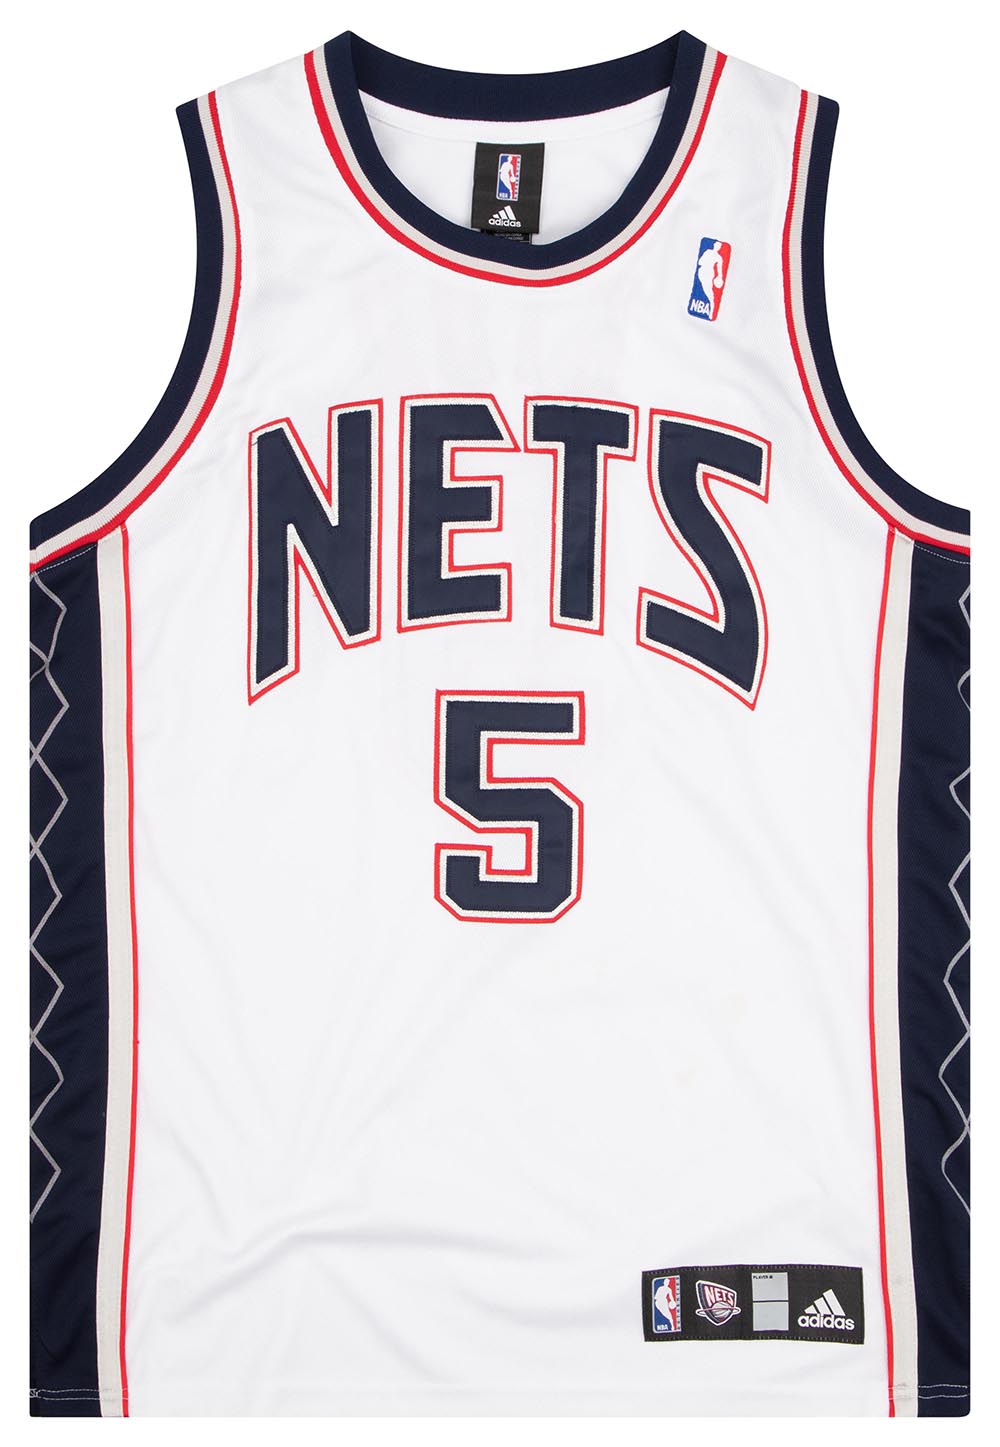 2006-08 AUTHENTIC NEW JERSEY NETS KIDD #5 ADIDAS JERSEY (HOME) M